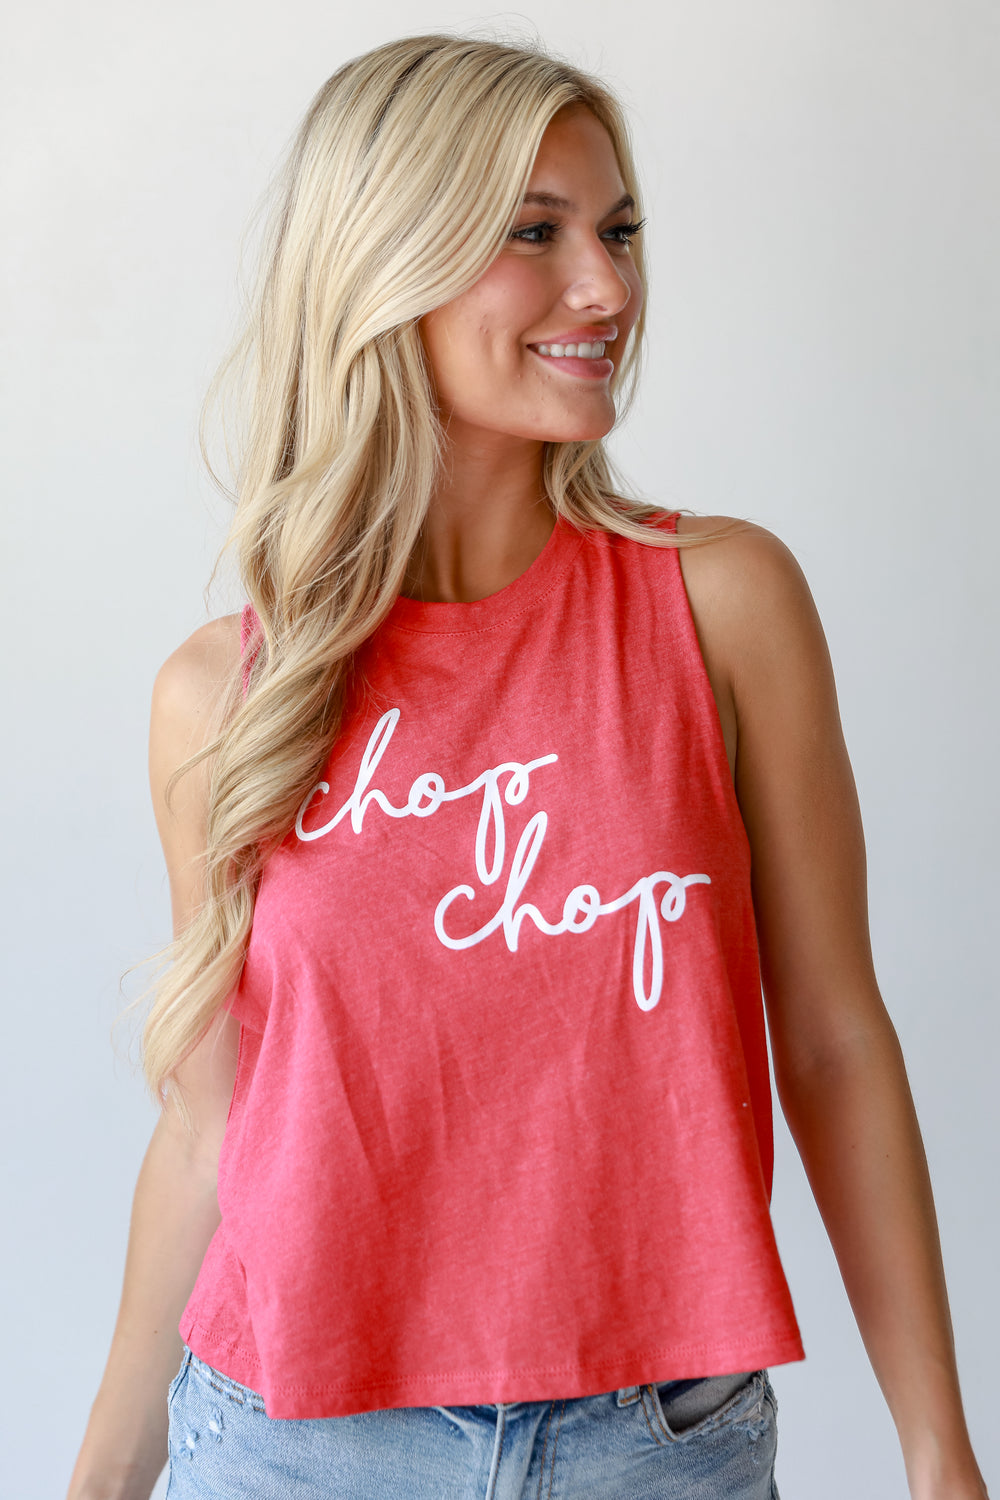 Red Chop Chop Muscle Tank on model